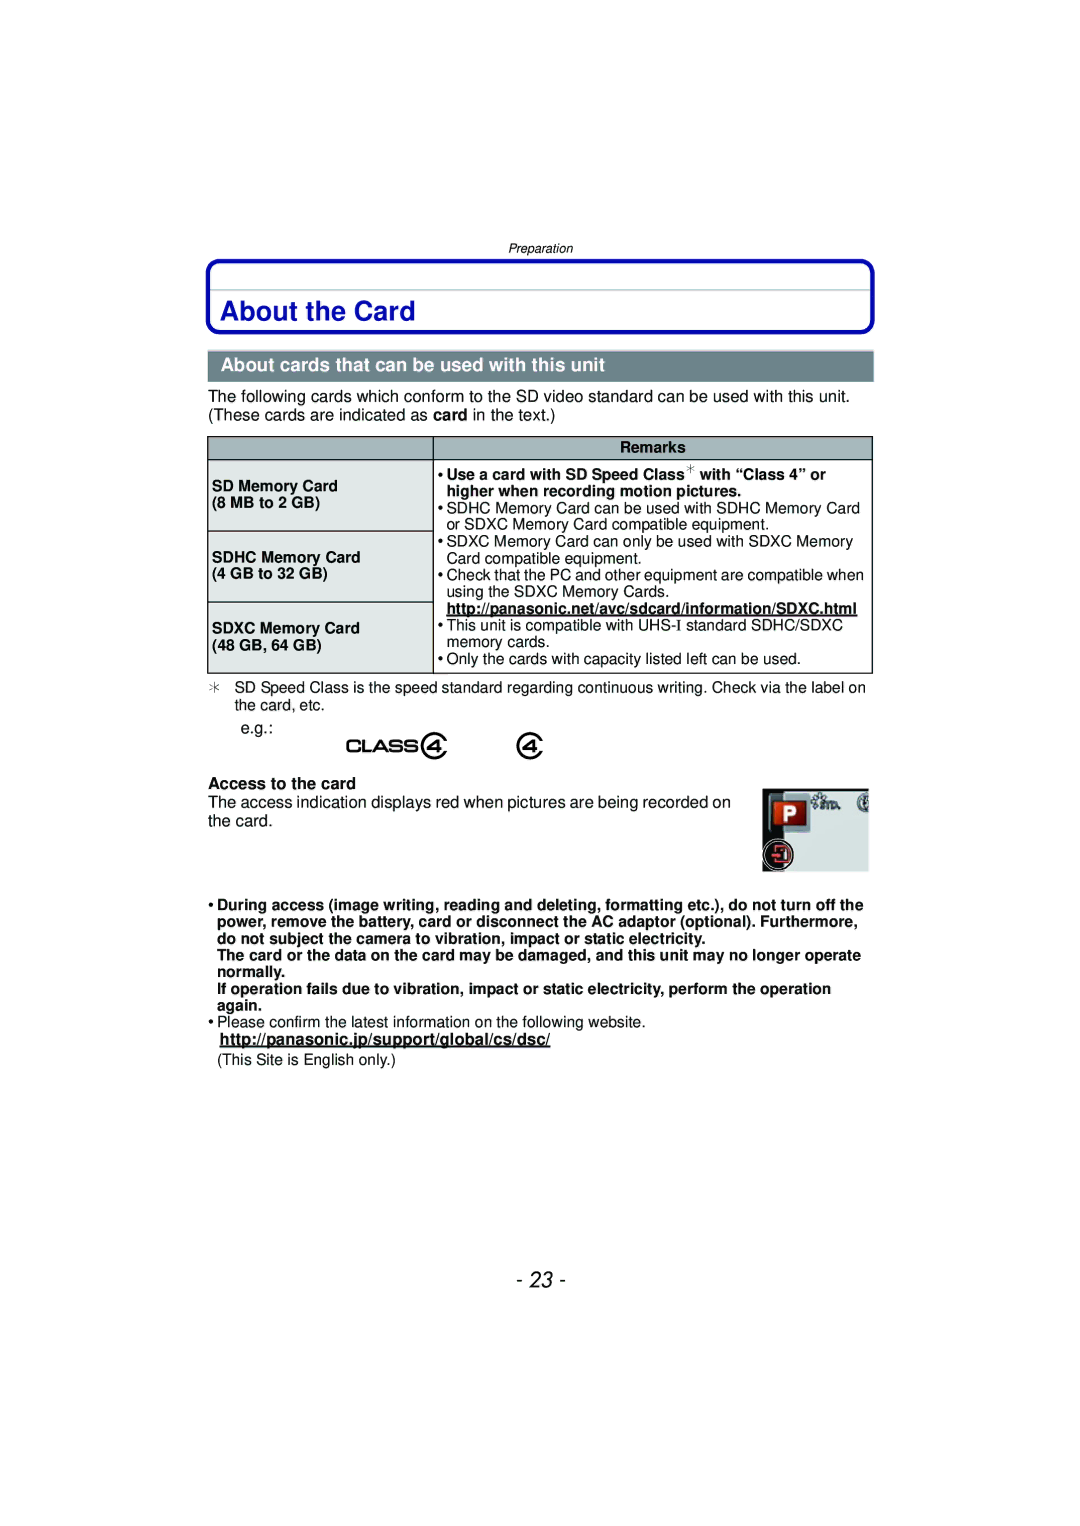 Panasonic DMC-GF5 owner manual About the Card, About cards that can be used with this unit, Access to the card 